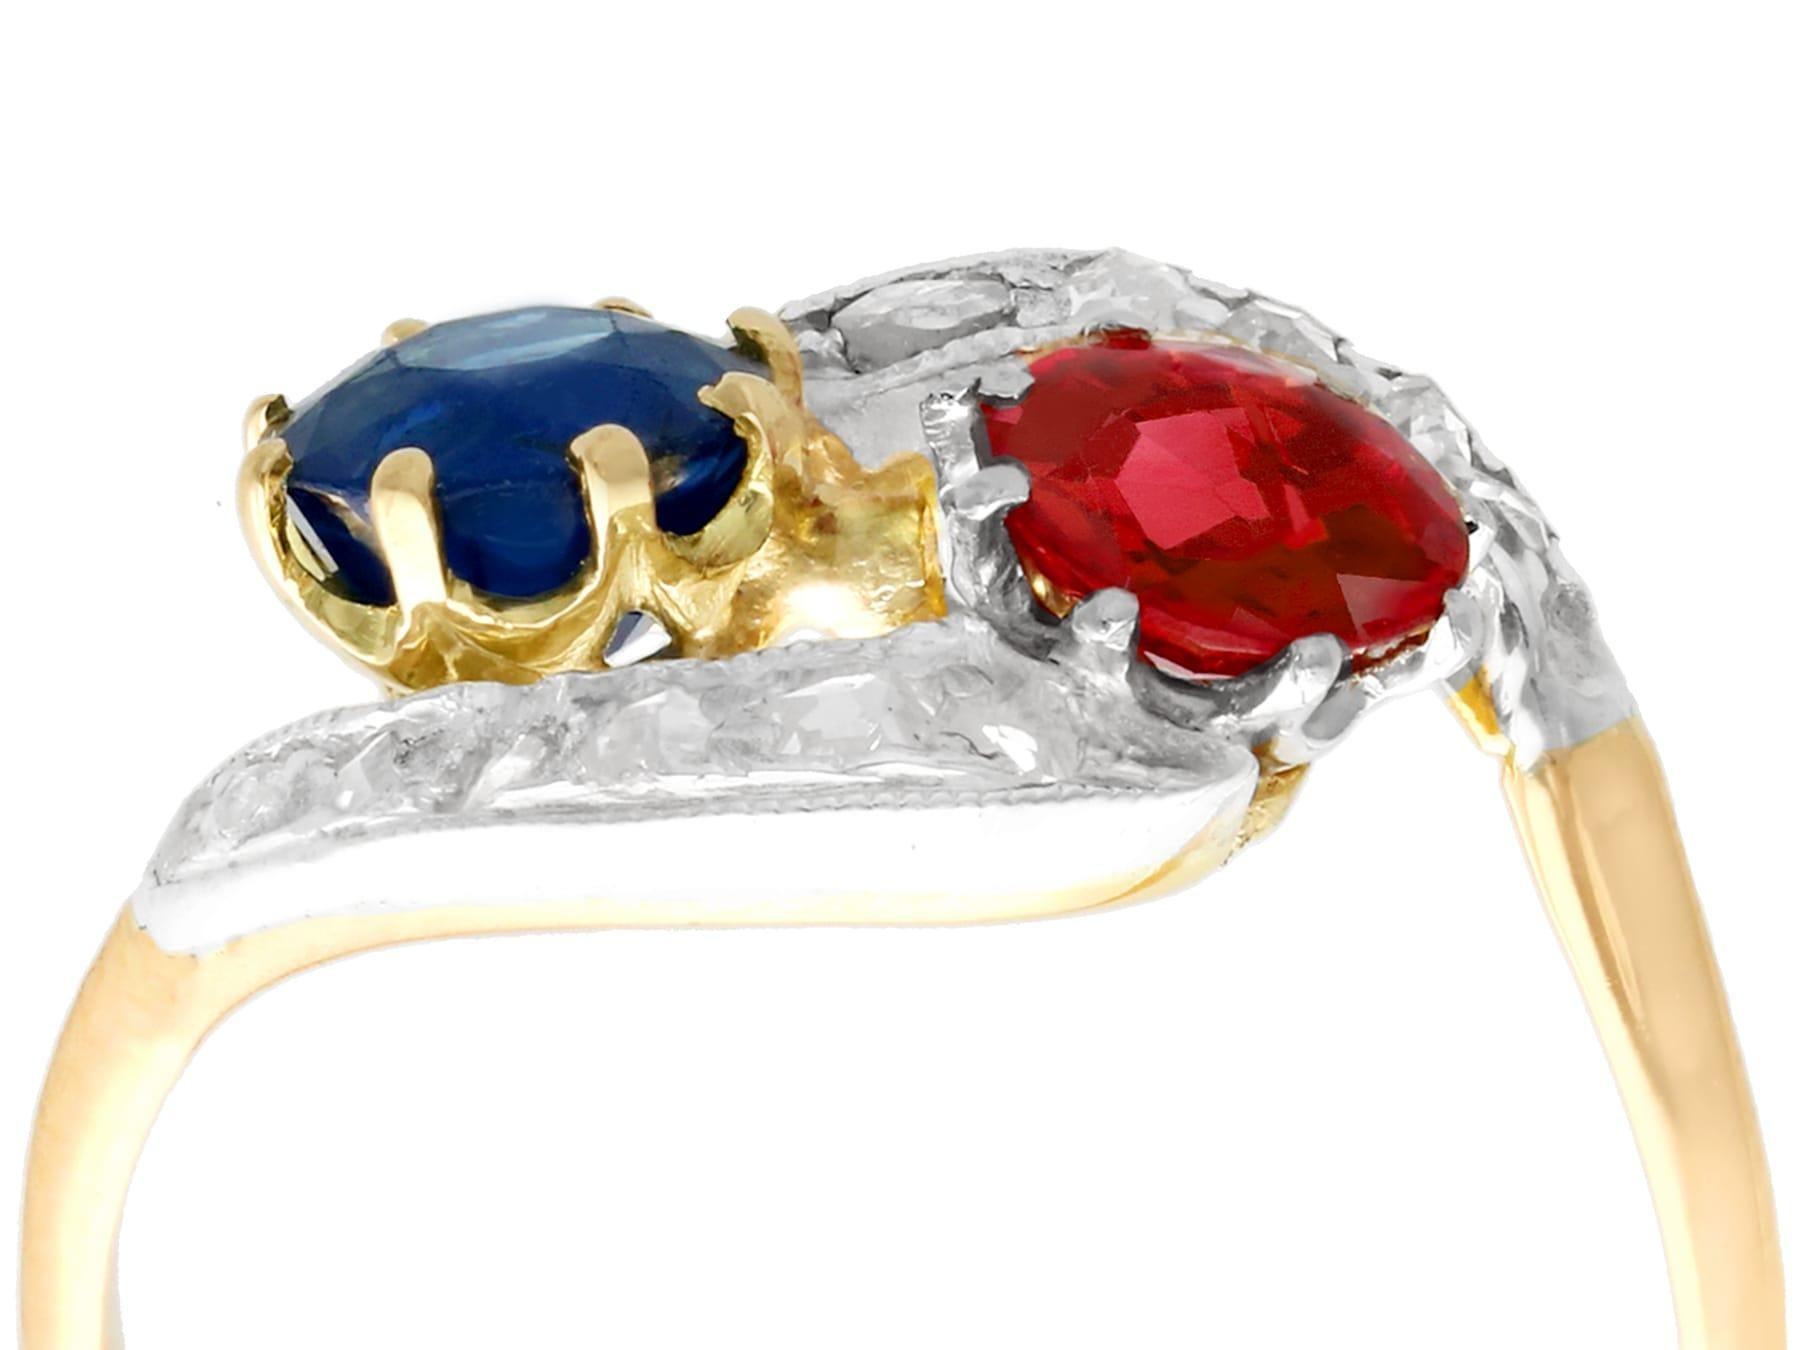 An impressive 0.68 carat red spinel and 1.02 carat blue sapphire, 18 karat yellow gold and 18 karat white gold set twist ring; part of our diverse antique jewelry collections.

This fine and impressive antique spinel ring has been crafted in 18k